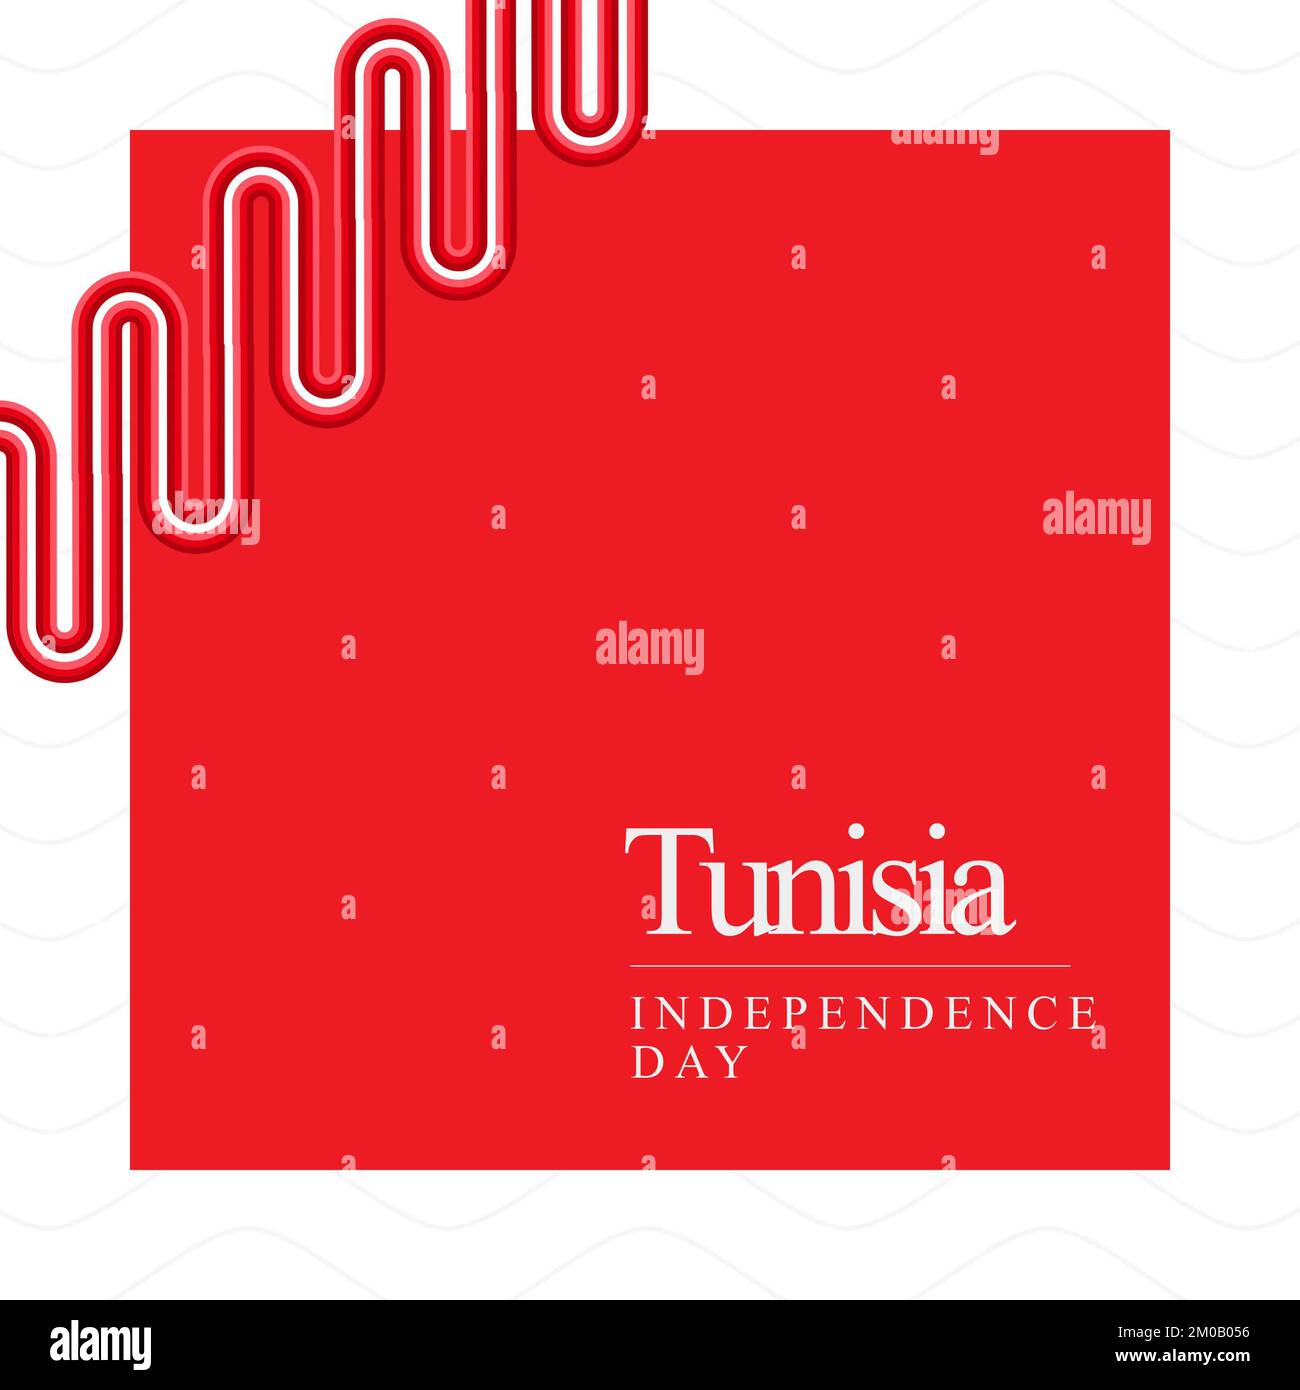 Composition of tunisia independence day text over red and white background Stock Photo